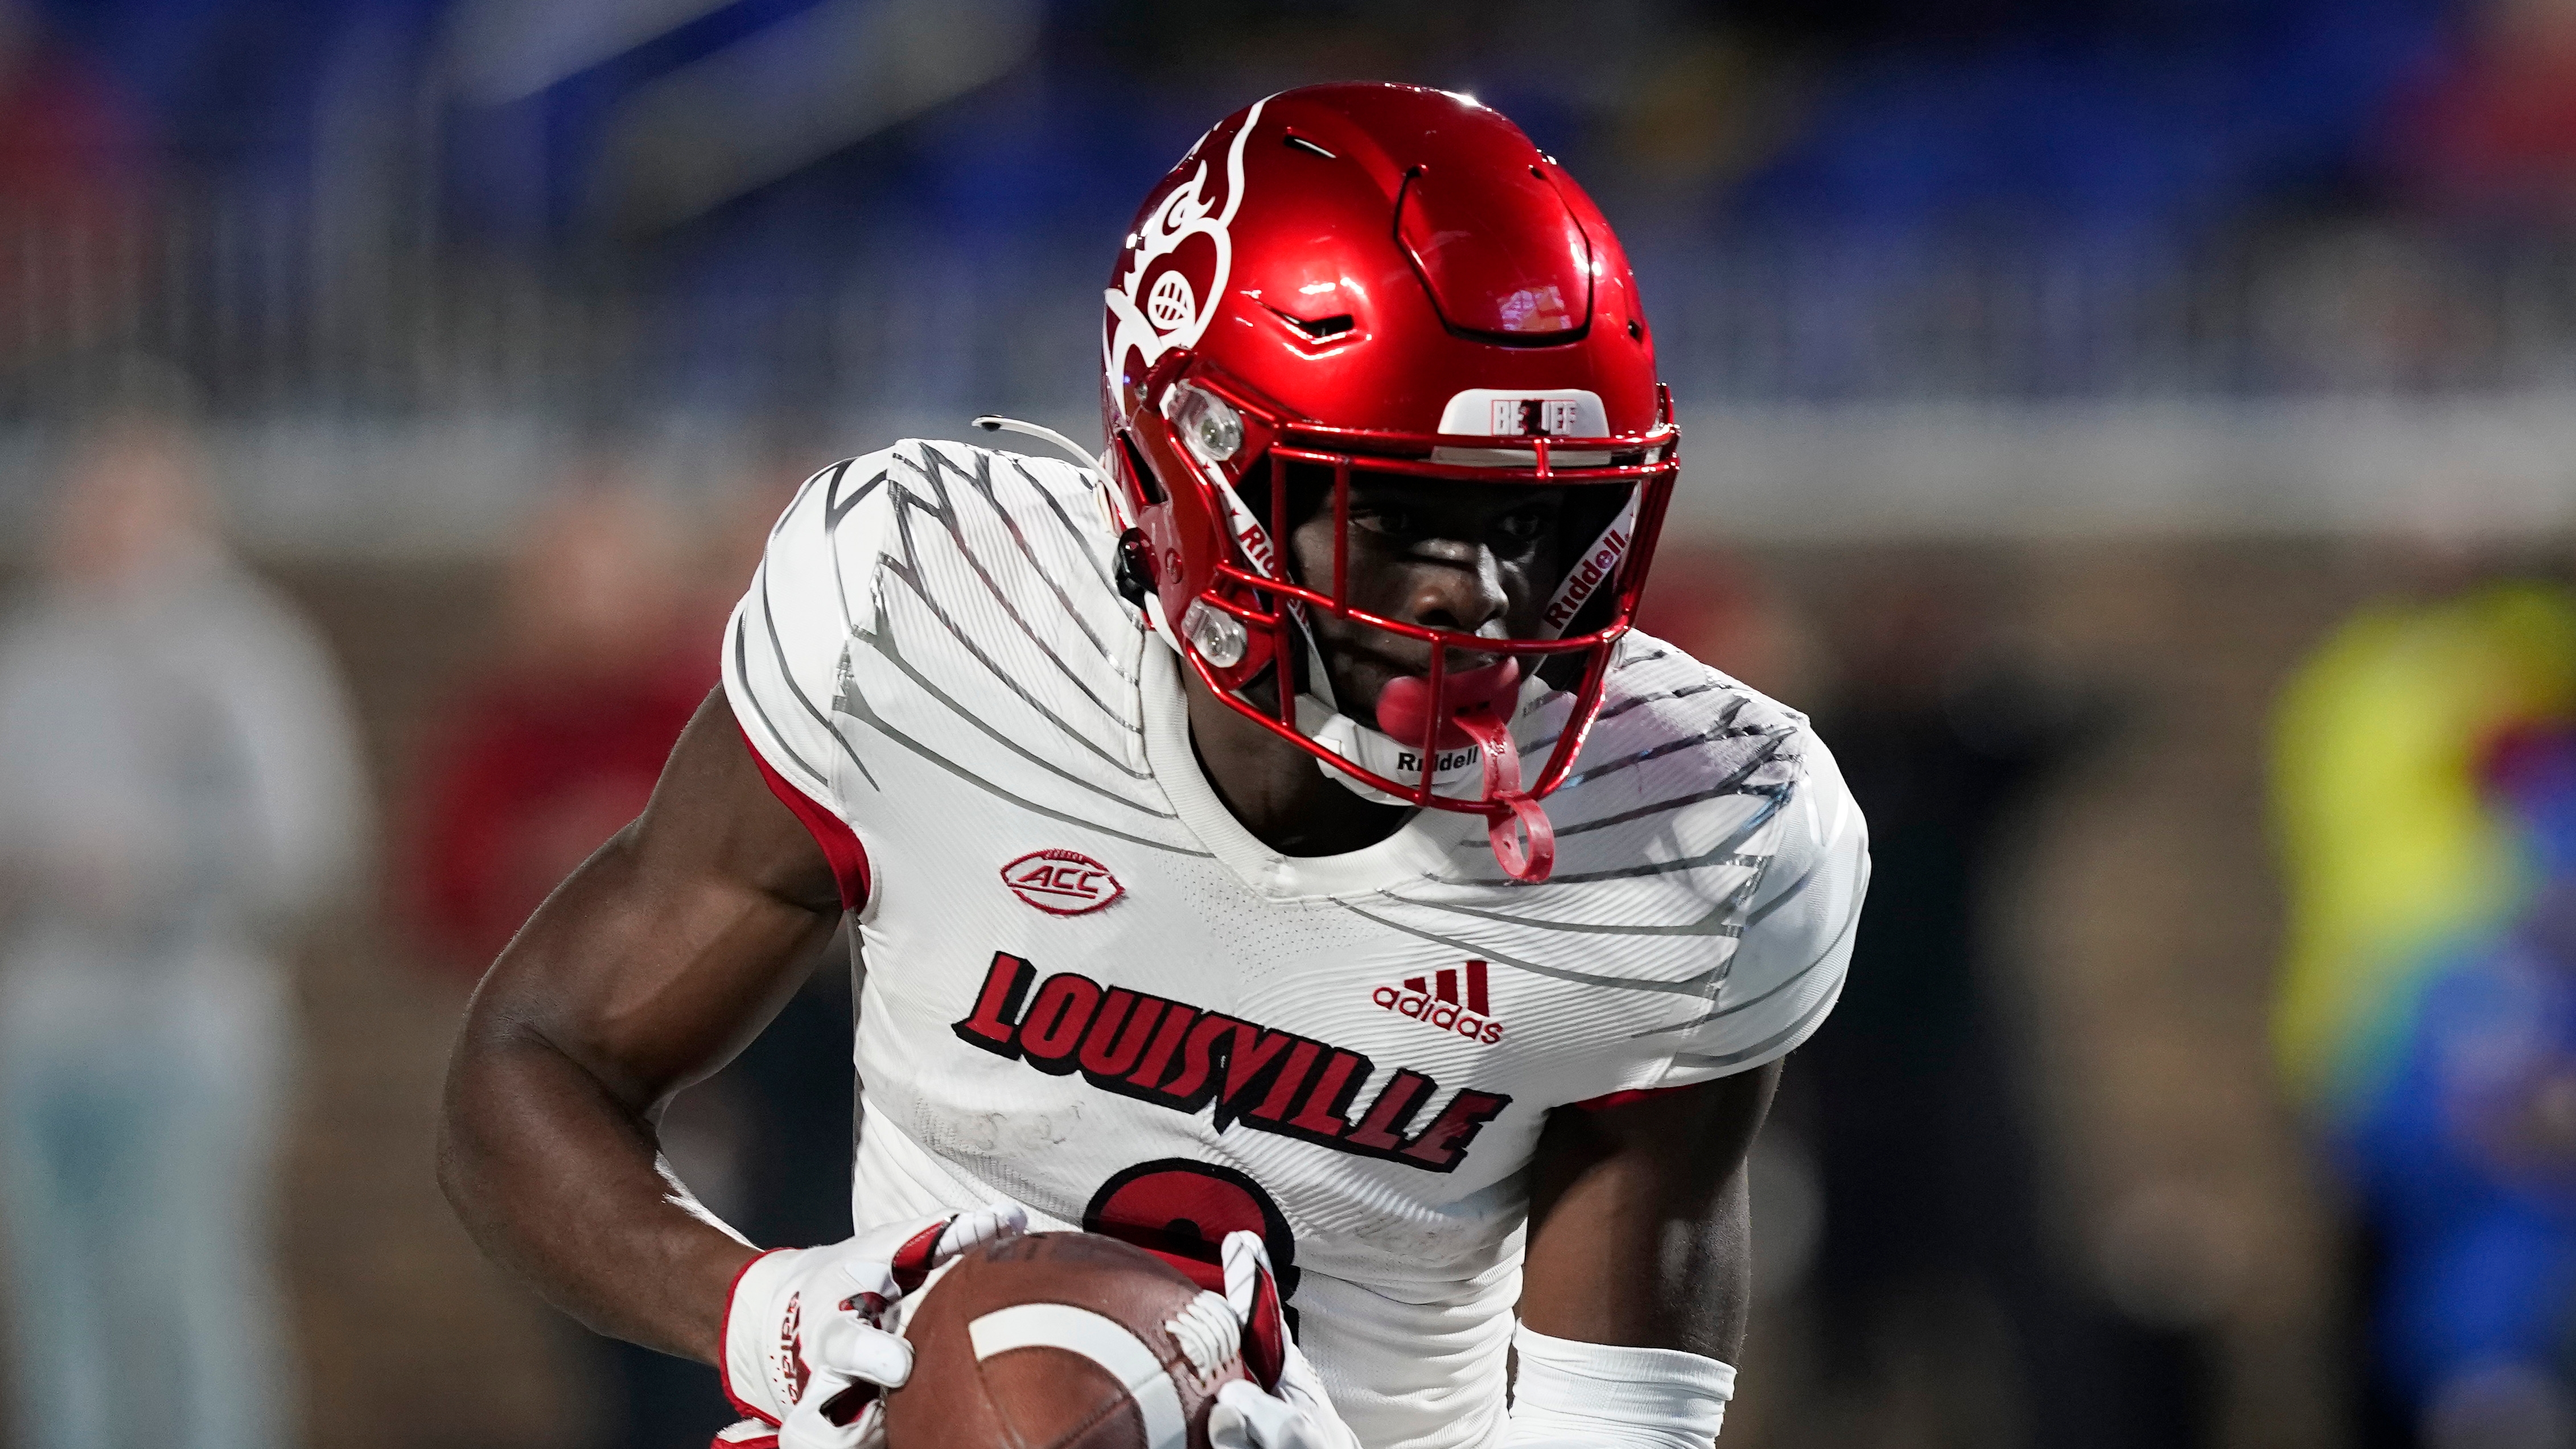 Louisville vs. Pitt: Watch college football game for free 